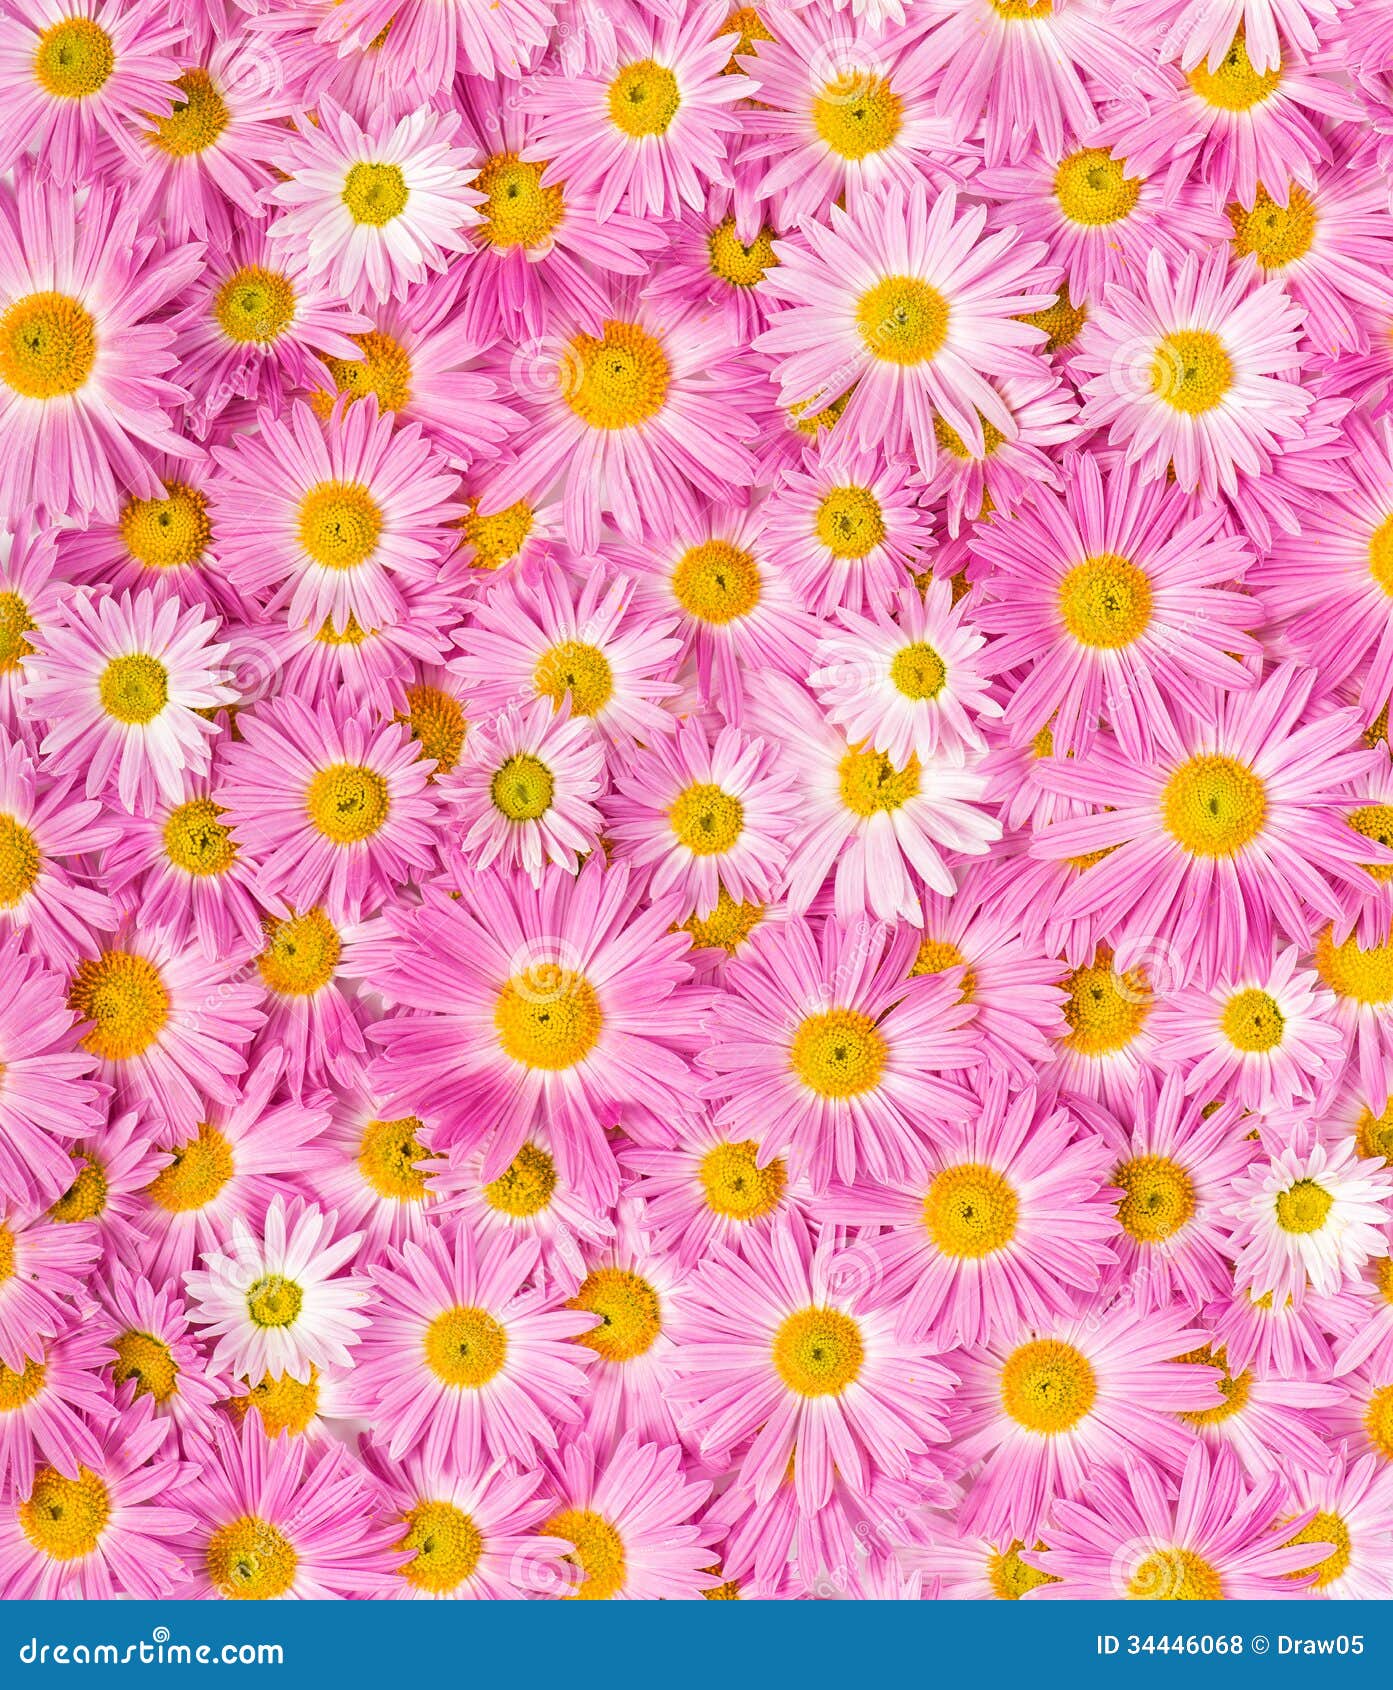 Pink And Yellow Flowers Royalty Free Stock Photos - Image ...
